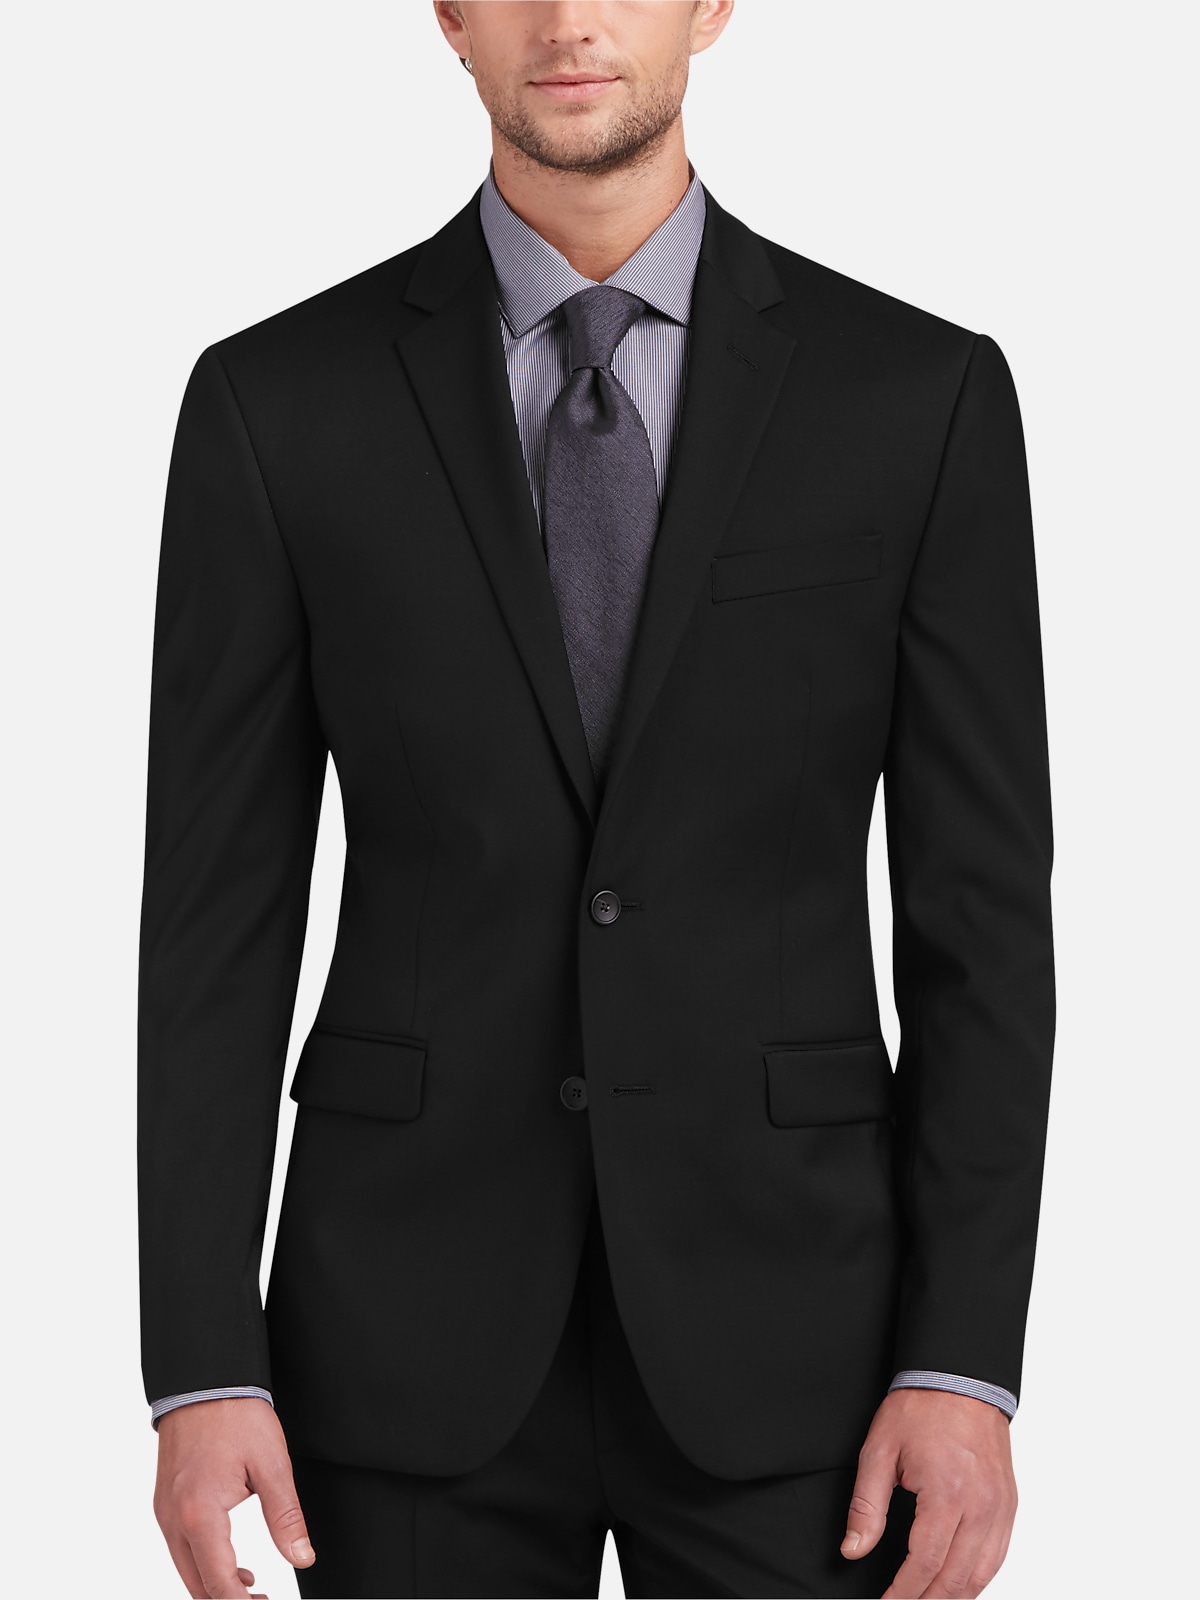 Awearness Kenneth Cole AWEAR-TECH Slim Fit Suit Separates Jacket | All ...